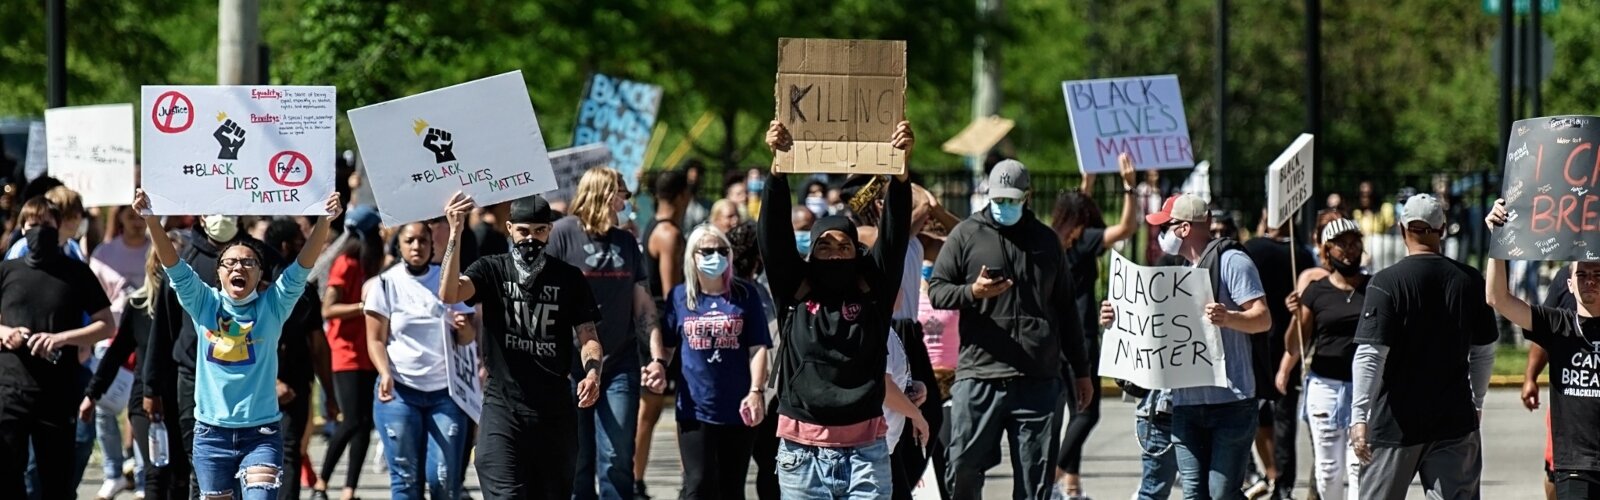 Demonstrators marched in a peaceful protest in Springfield in May after the death of George Floyd in Minnesota.